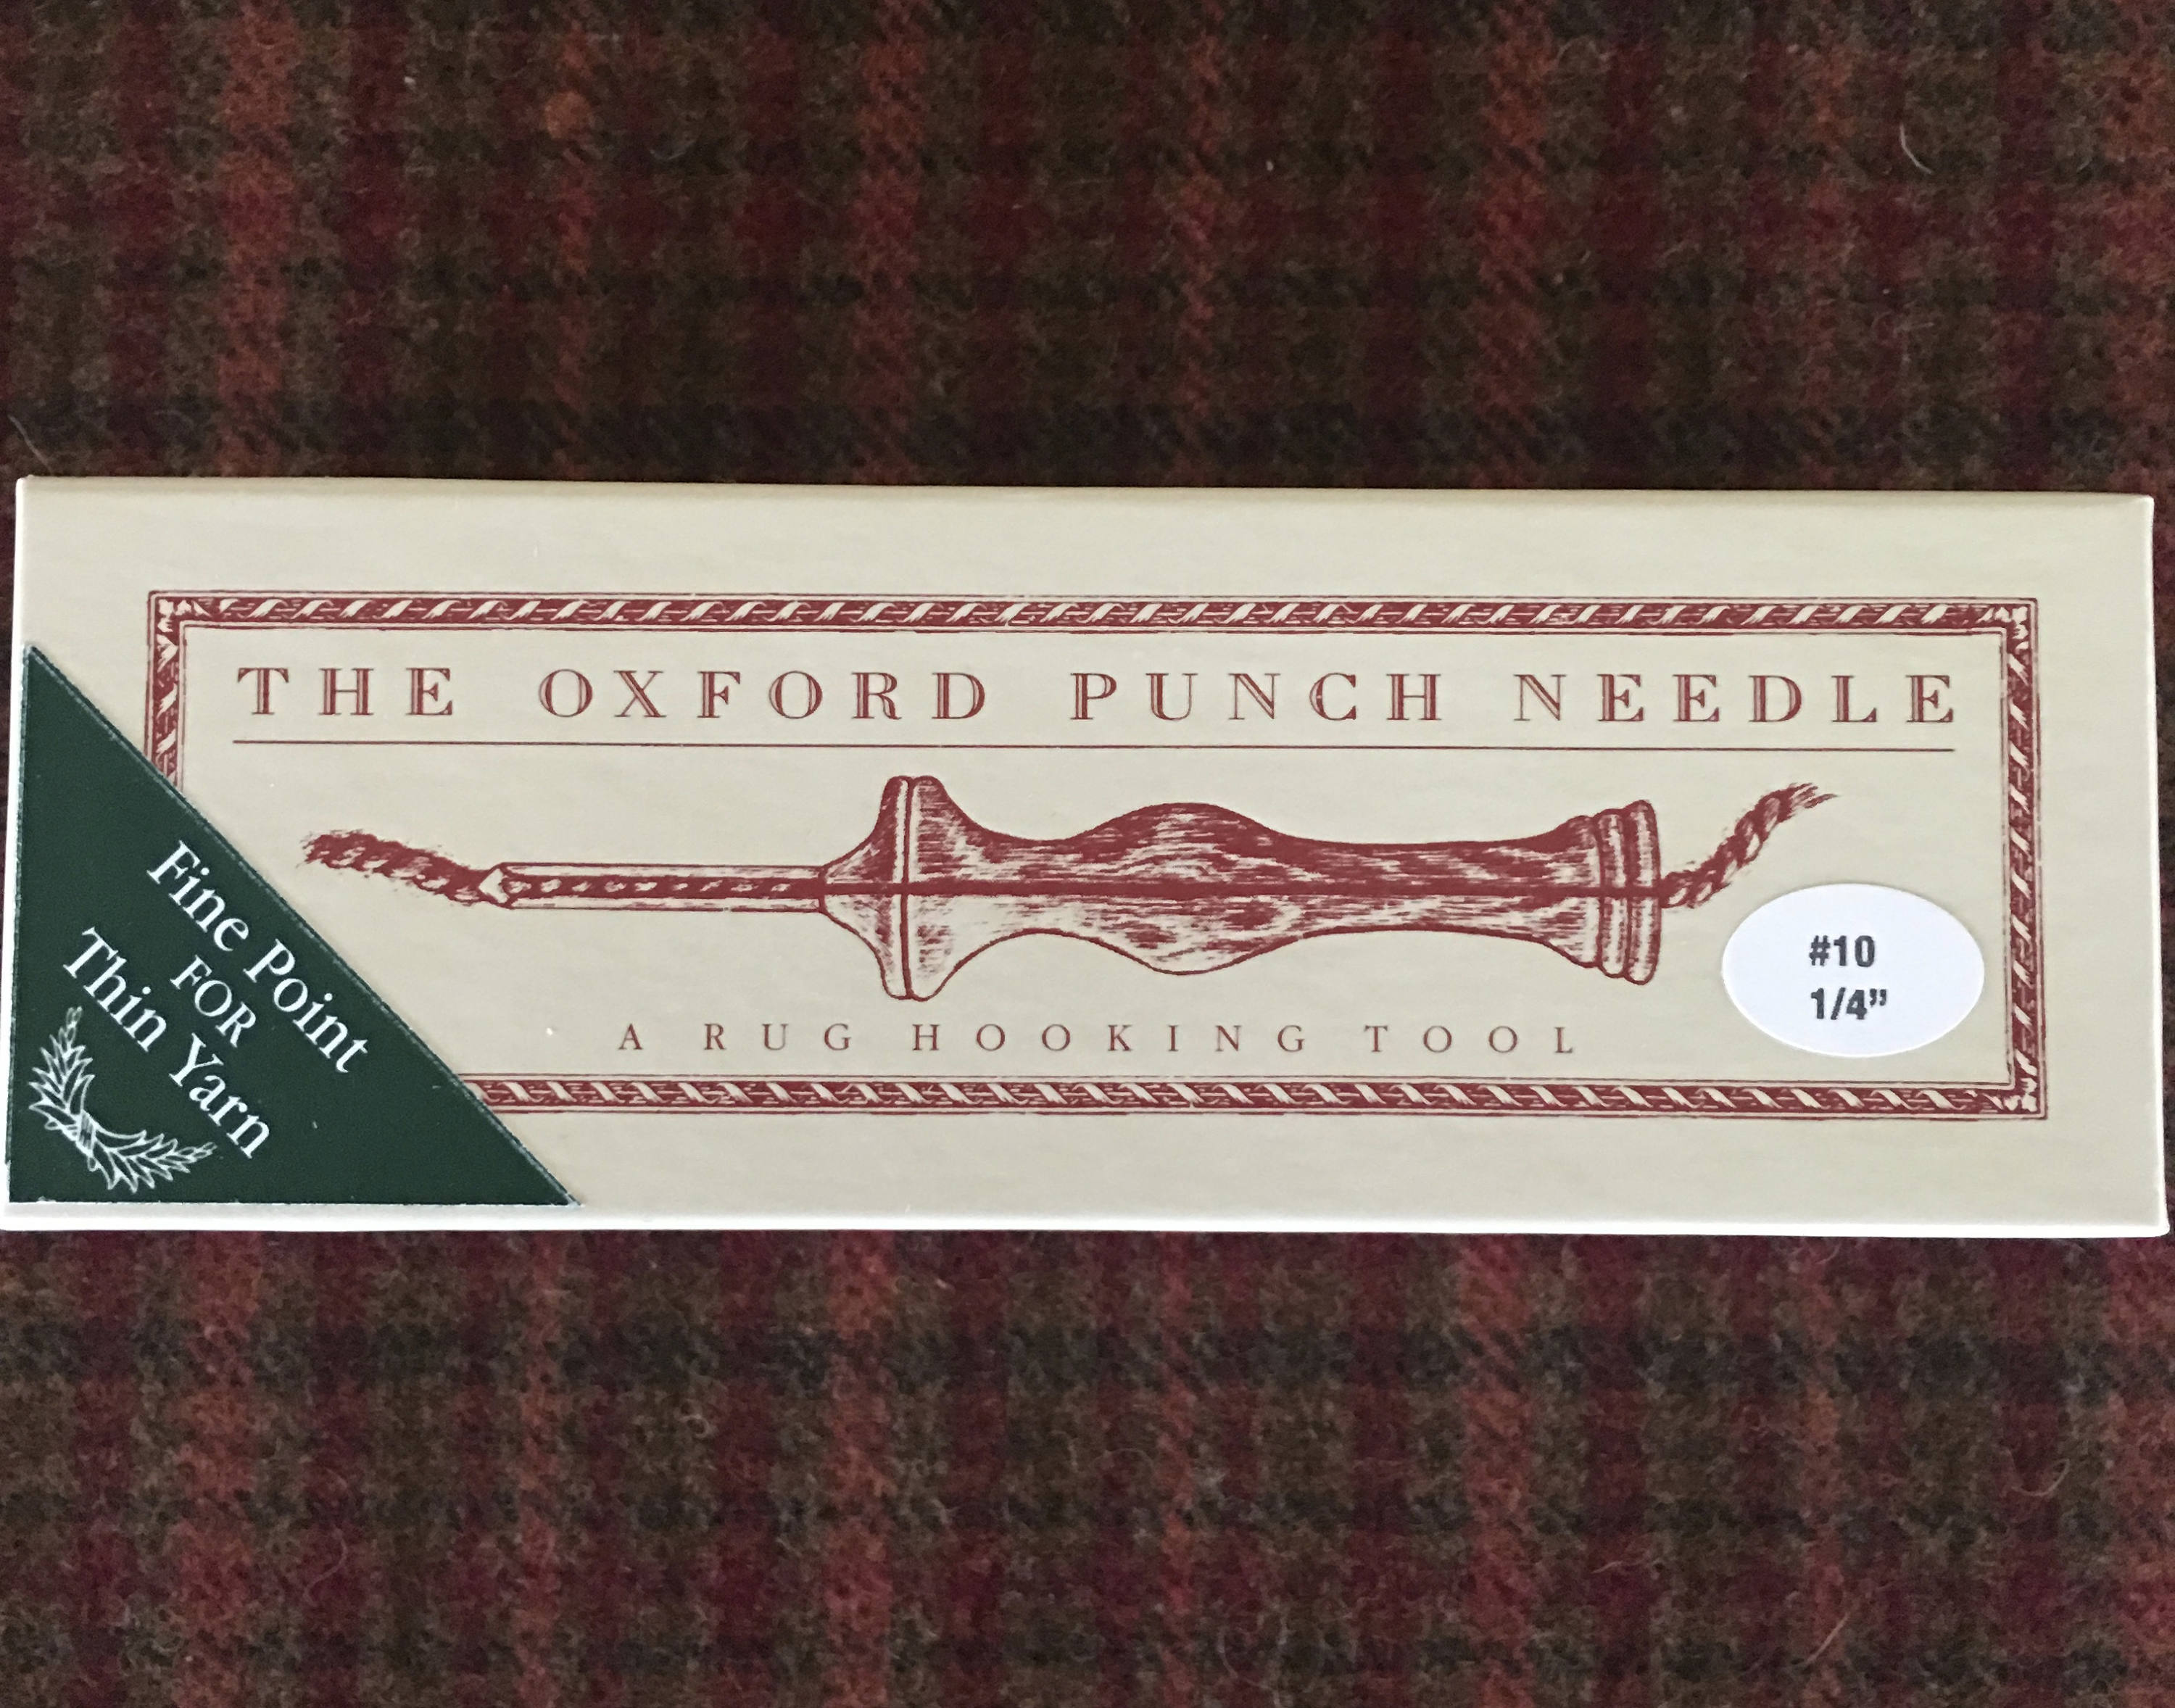 Oxford Punch Needle - Regular - punch needle rug hooking tool - 10, 9, or 8  available (Not the Boxed Set)